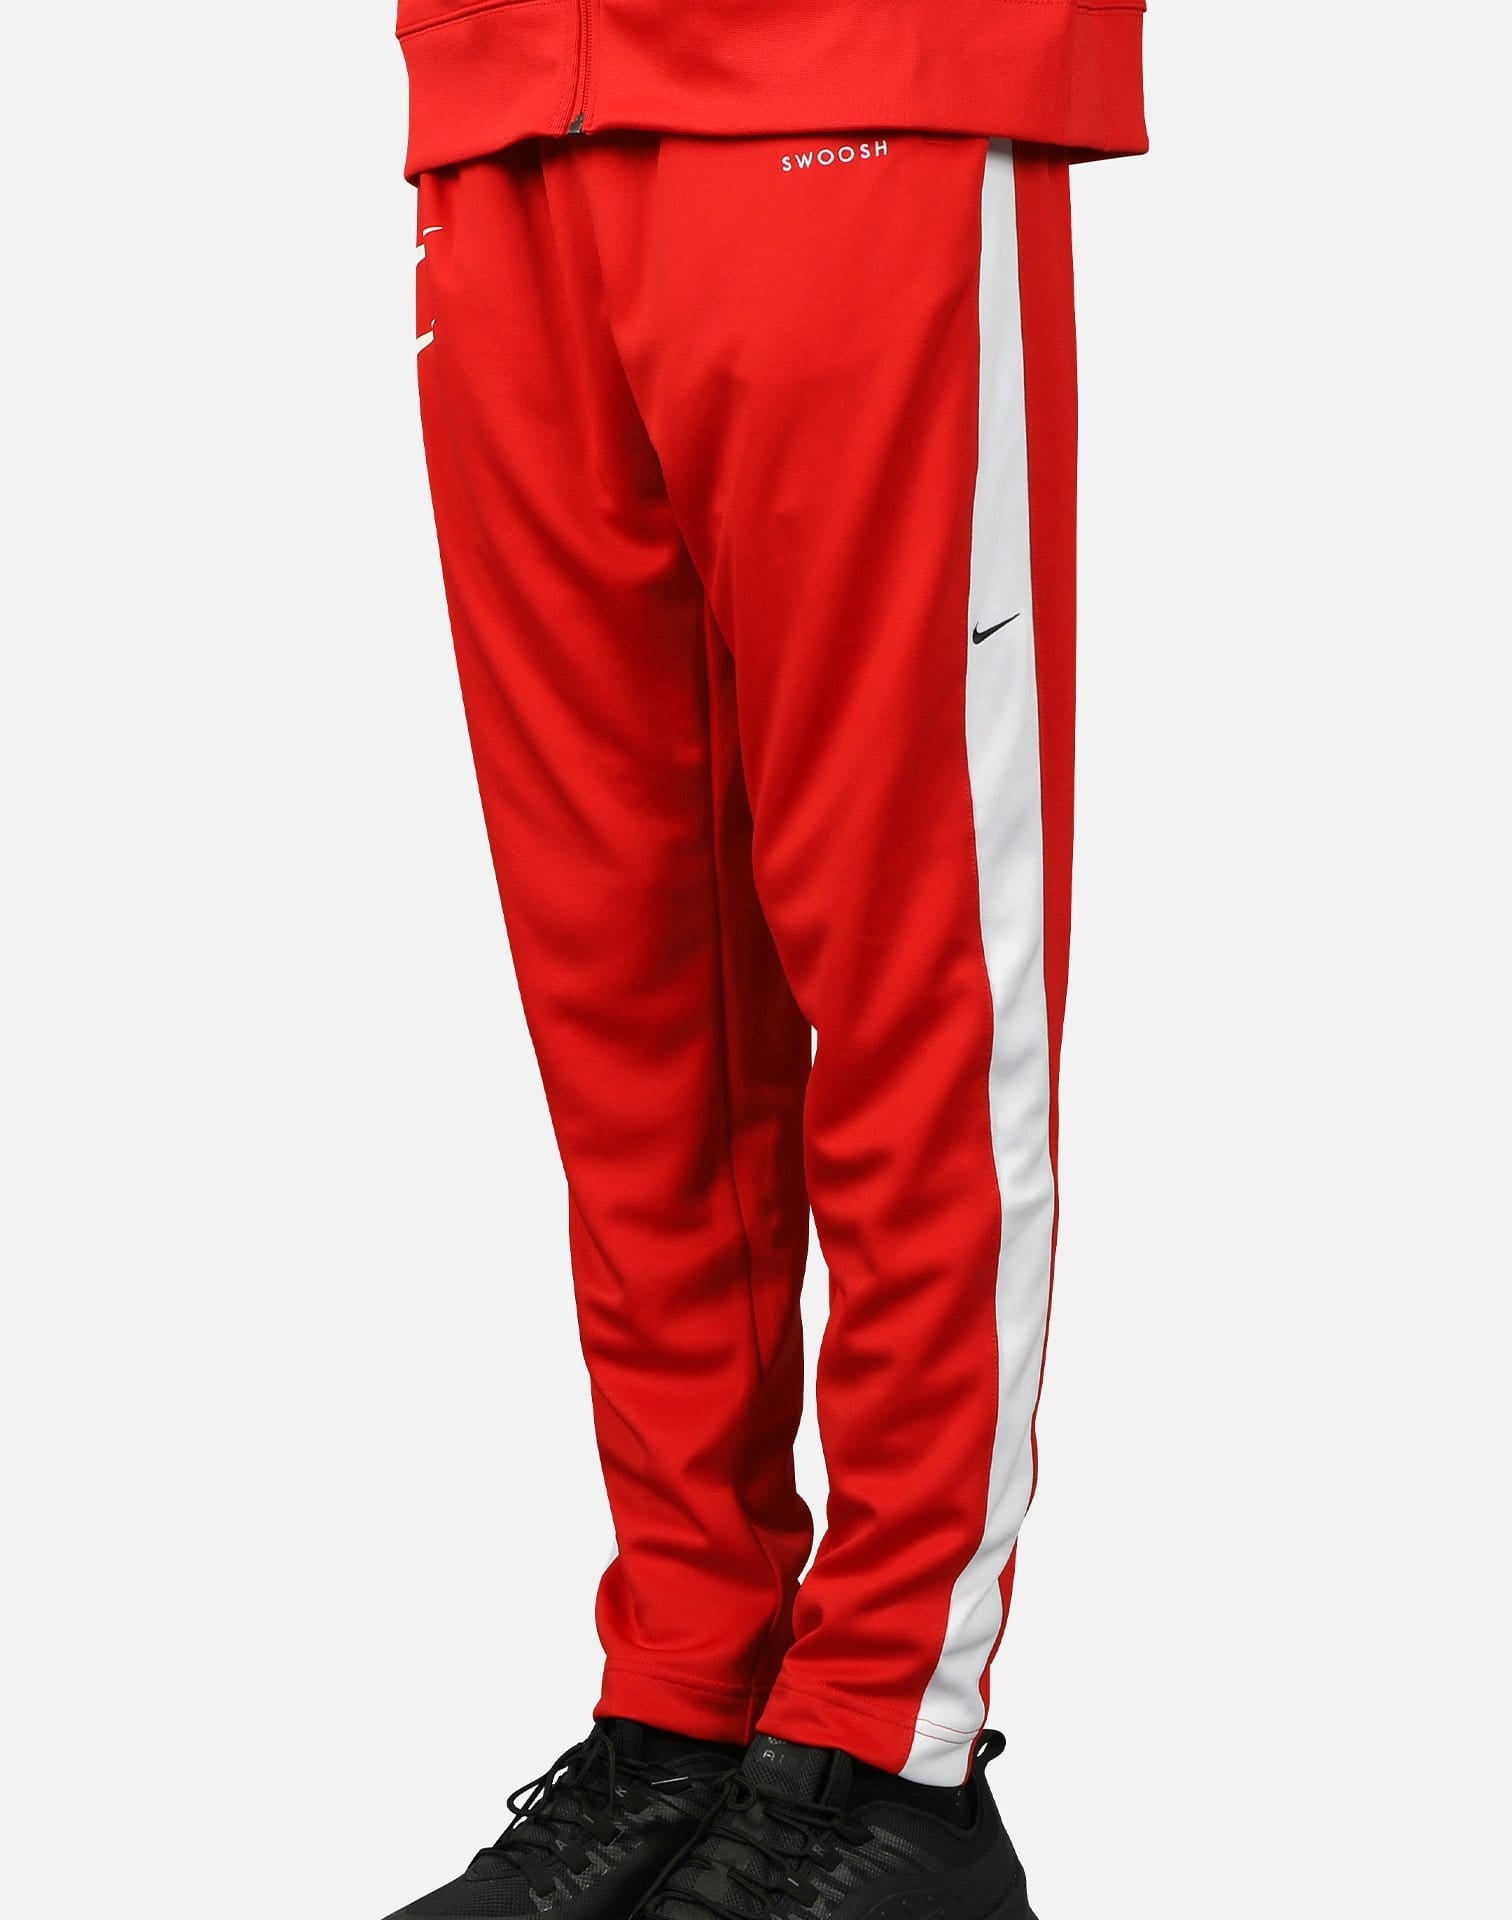 NSW STACKED SWOOSH PANTS – DTLR